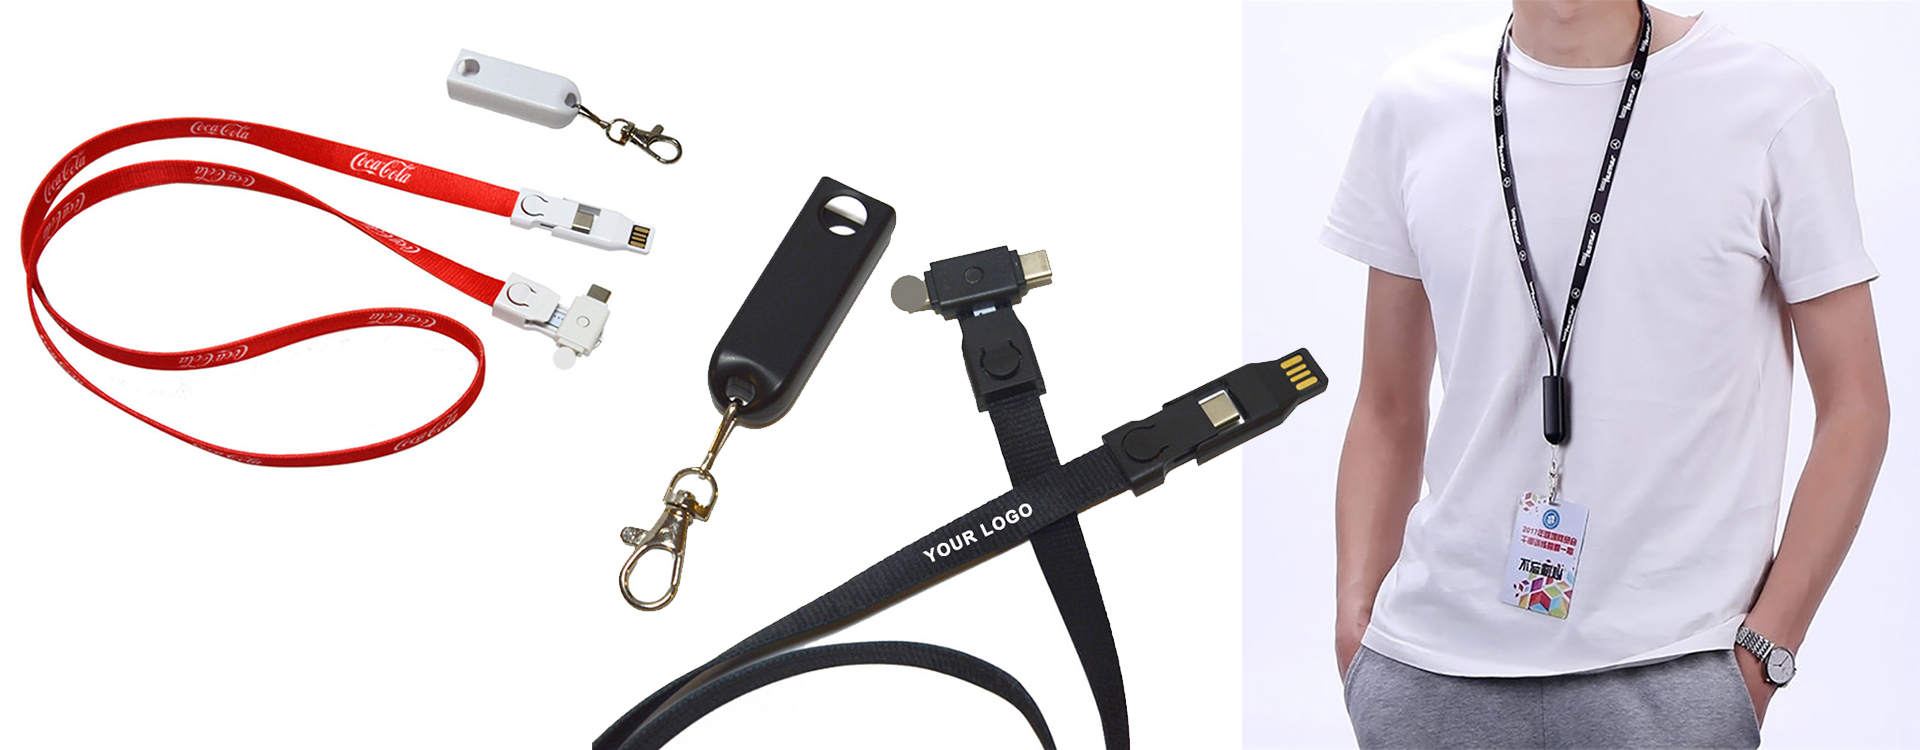 Phone Charger Cable promotional items near me